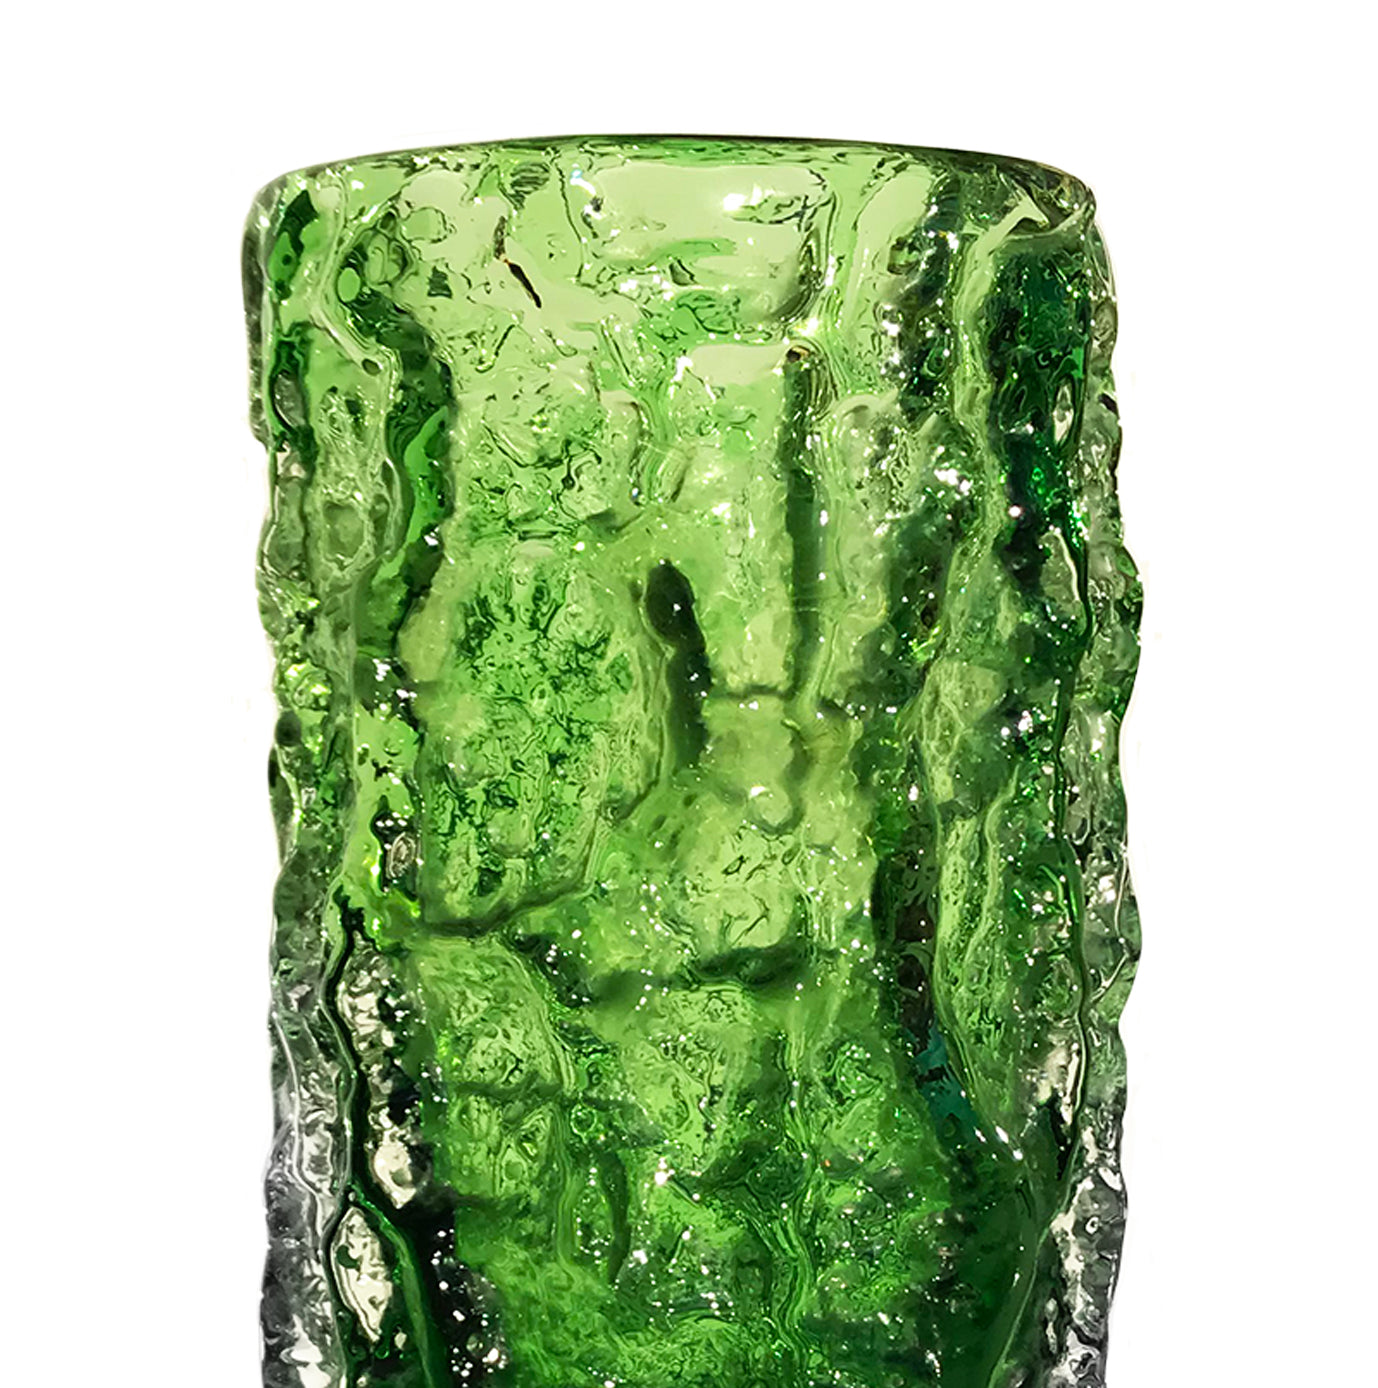 Whitefriars Meadow Green glass cylindrical 7.5" 'Bark' vase, from the 'Textured' range, designed by Geoffrey Baxter - SHOP NOW - www.intovintage.co.uk